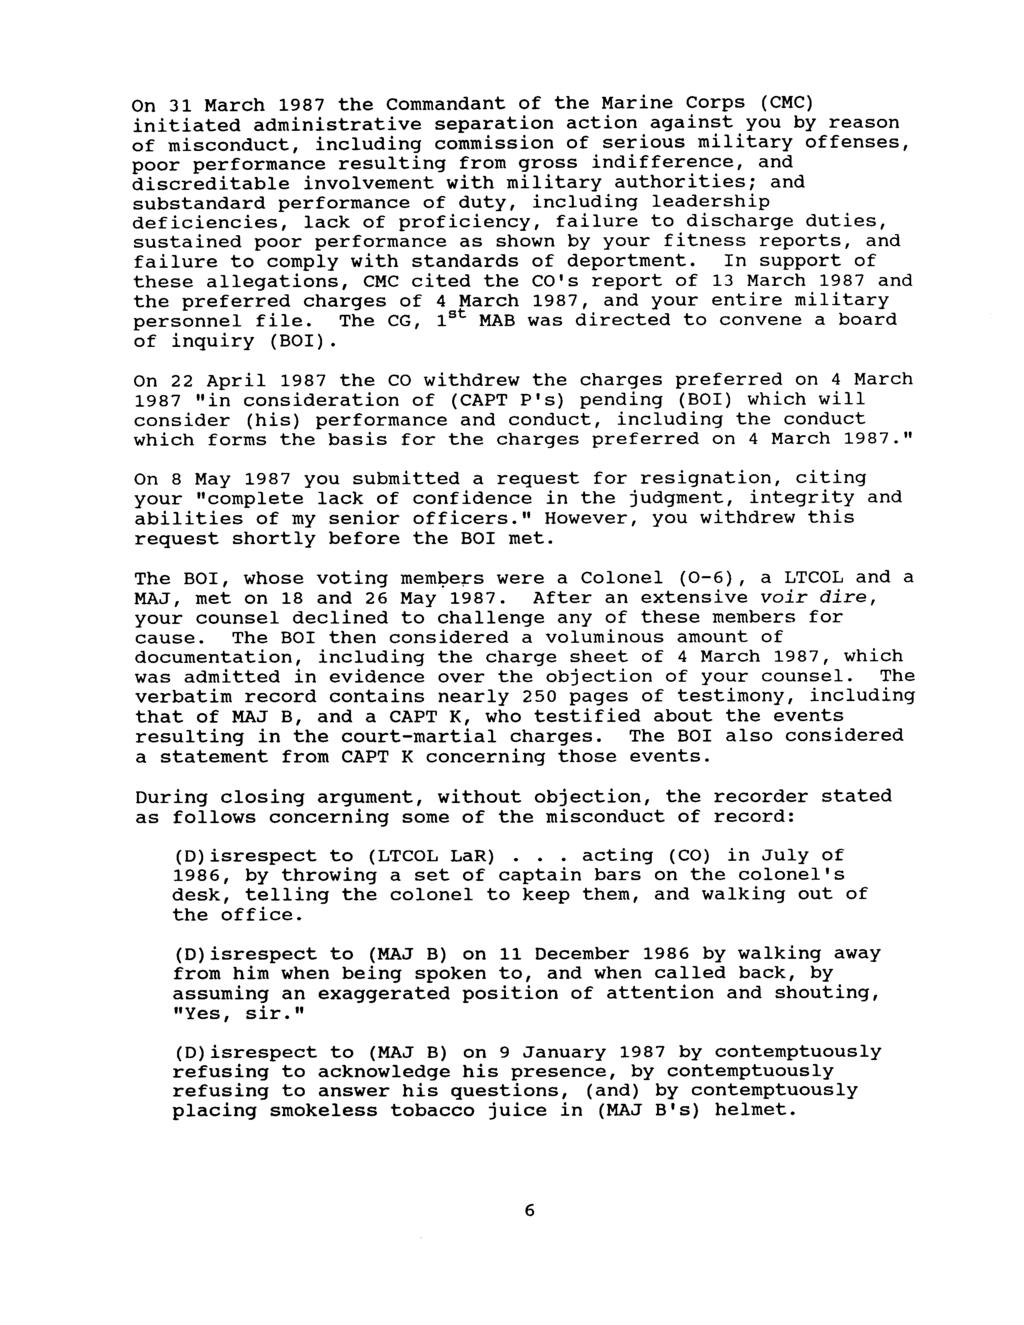 On 31 March 1987 the Commandant of the Marine Corps (CMC) initiated administrative separation action against you by reason of misconduct, including commission of serious military offenses, poor